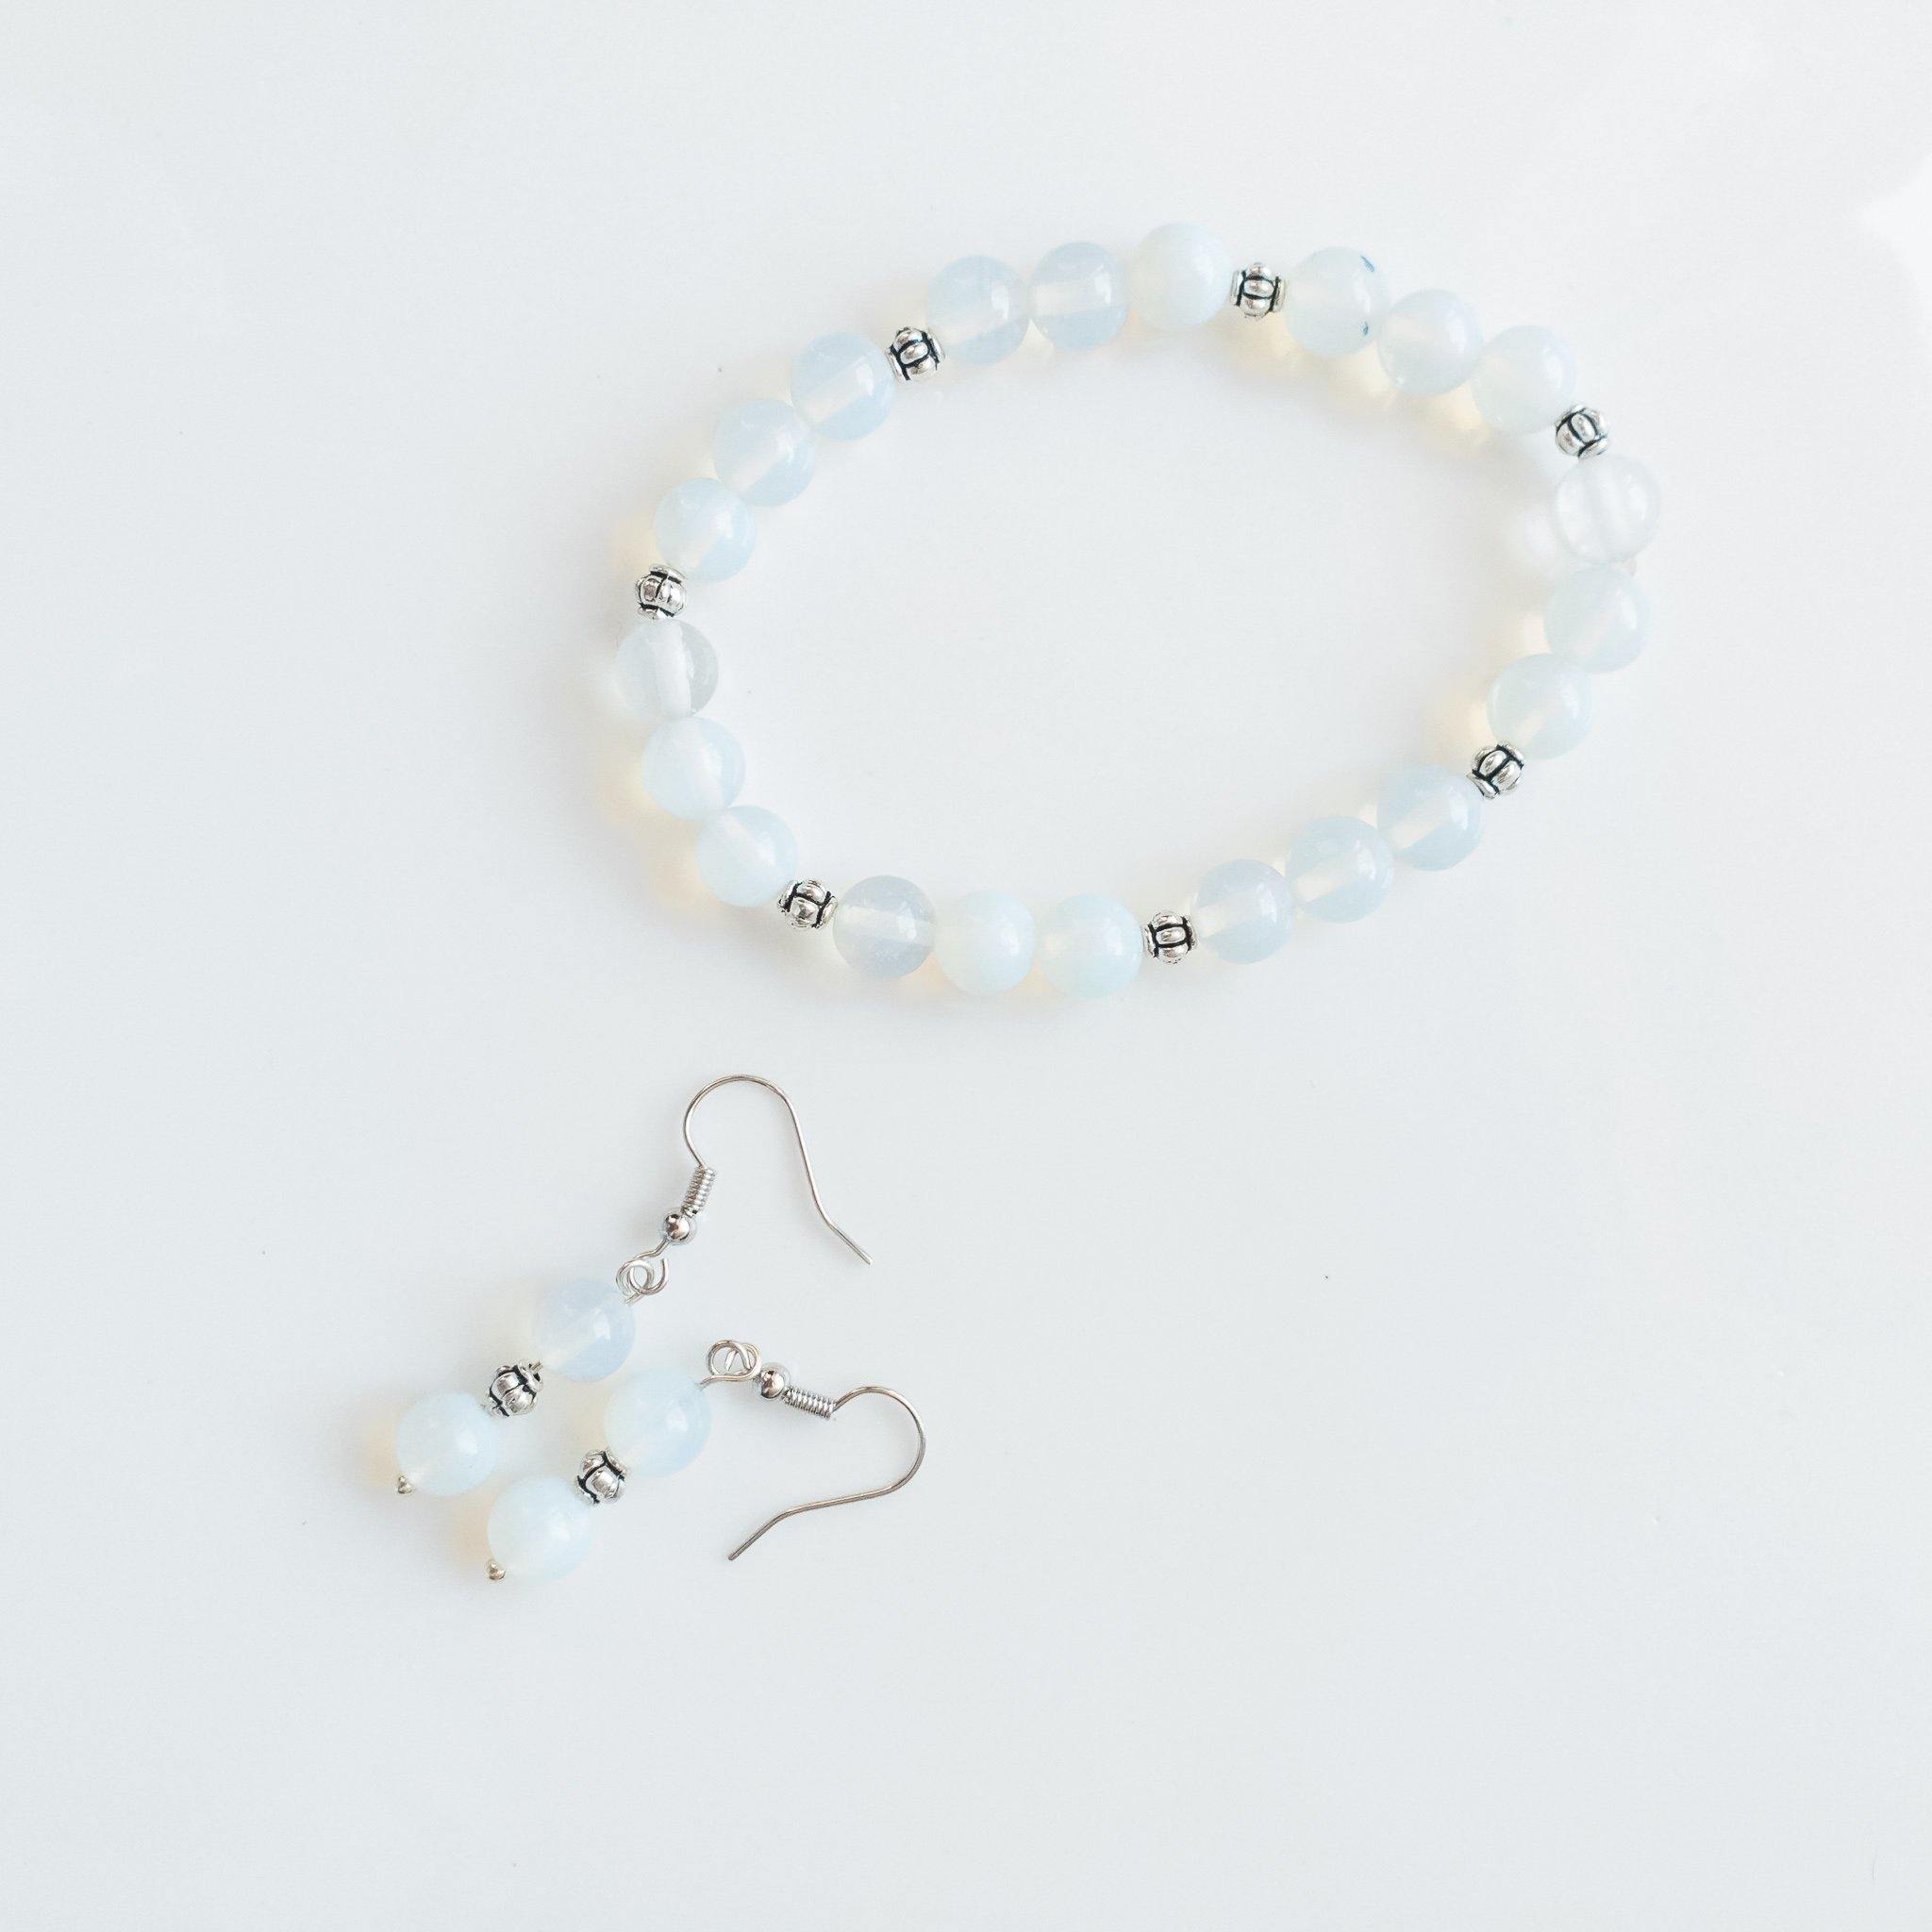 Celestial Collection - Gorgeous Opalite Bracelet and Earrings - top view - BellaChel Jeweler